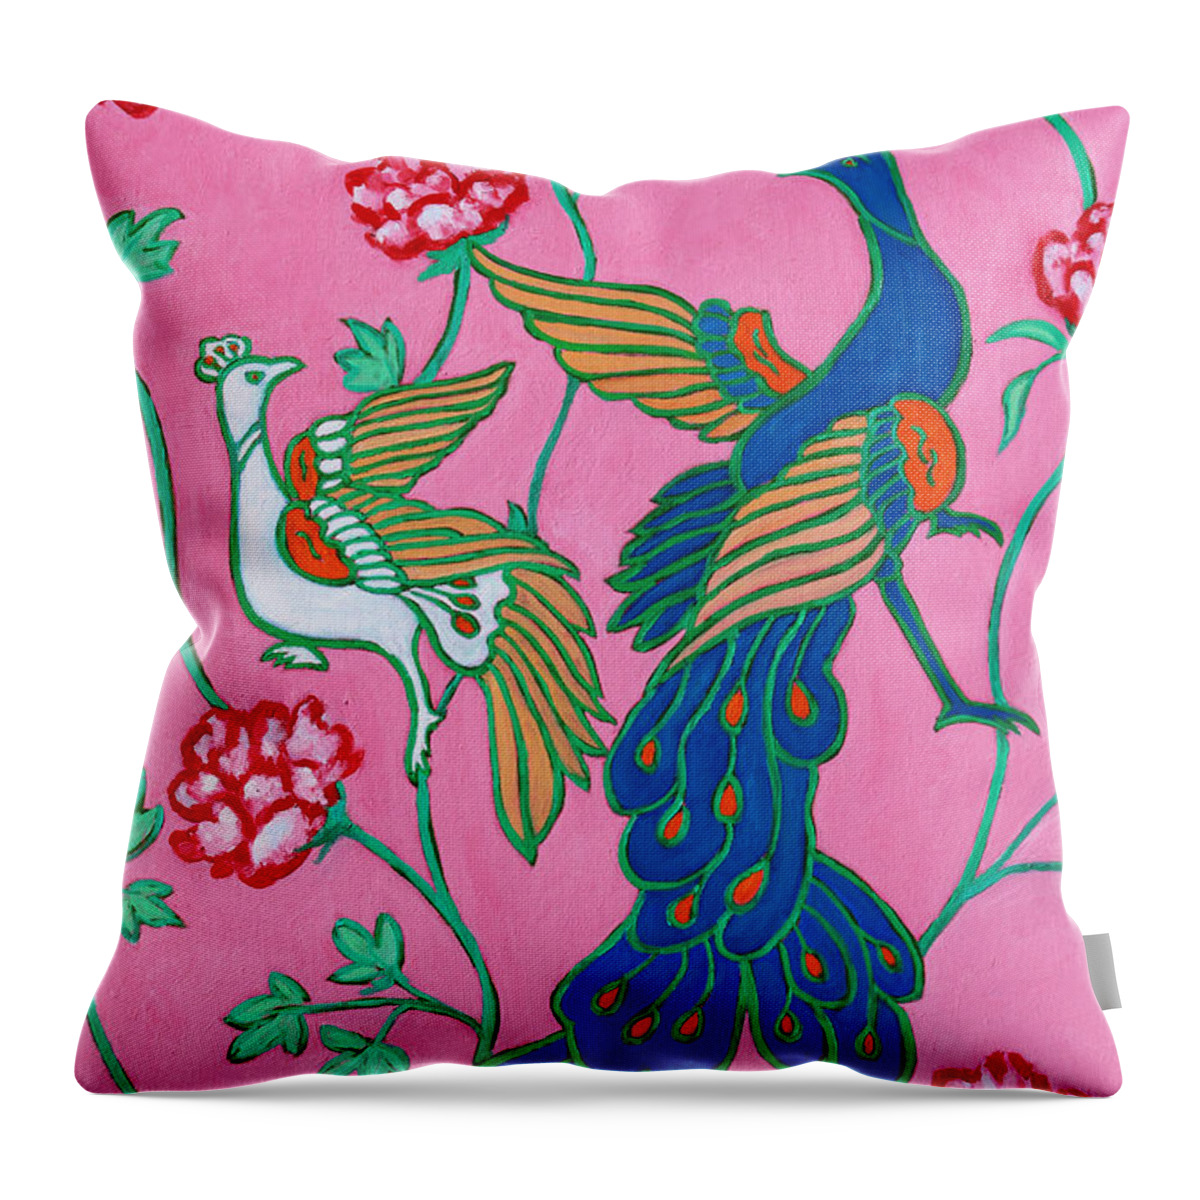 Peacock Throw Pillow featuring the painting Peacocks Flying Southeast by Xueling Zou